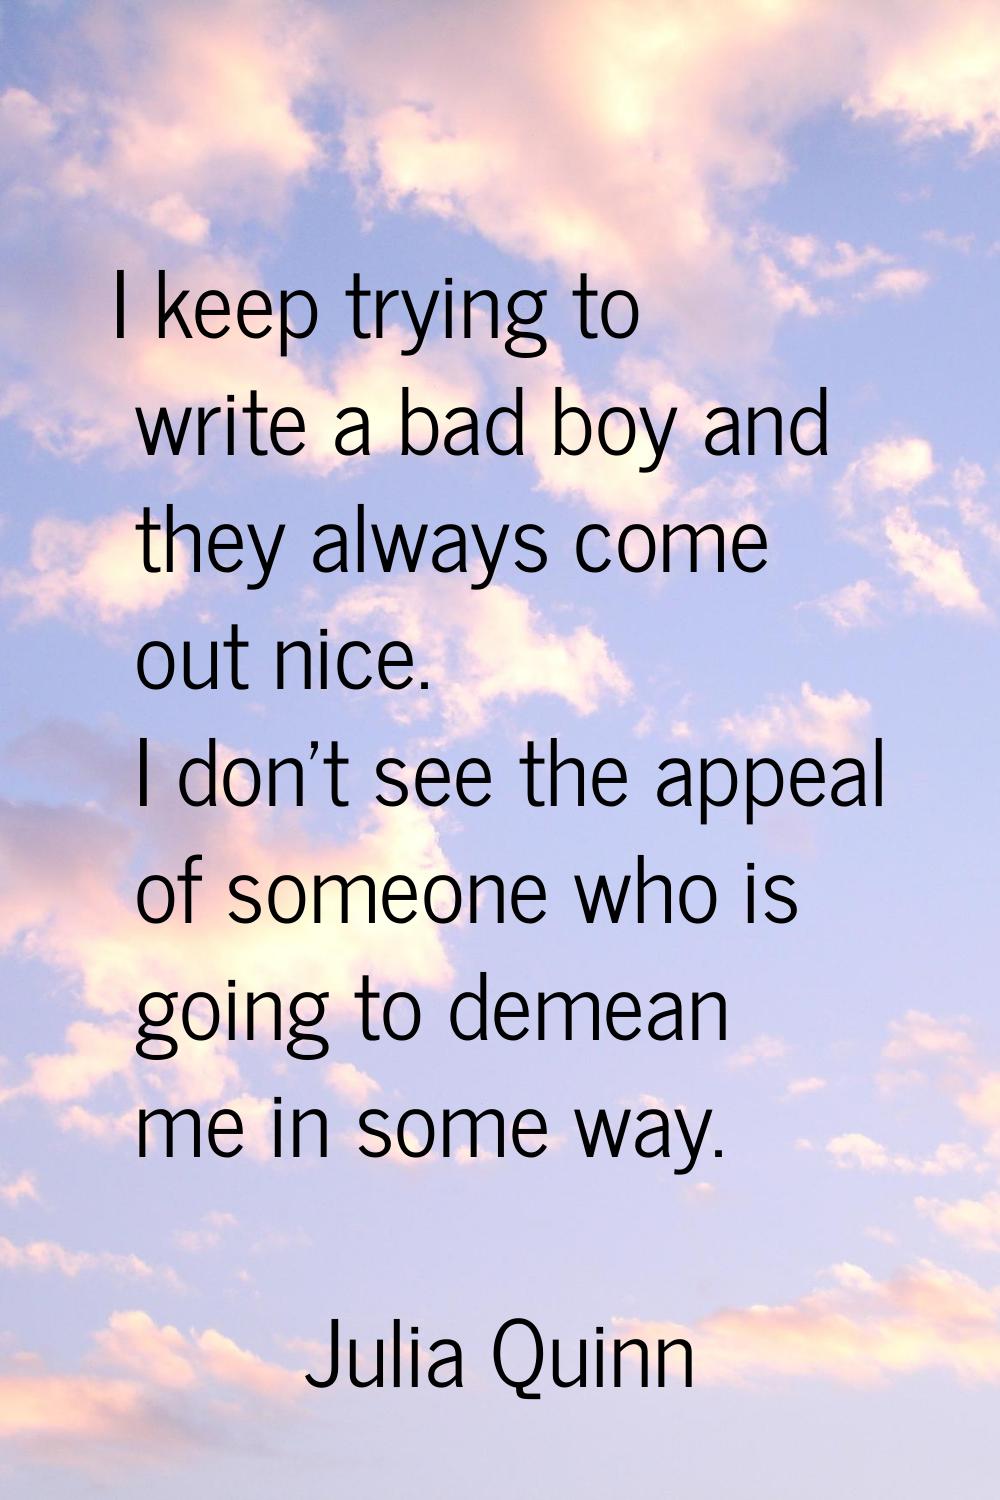 I keep trying to write a bad boy and they always come out nice. I don't see the appeal of someone w